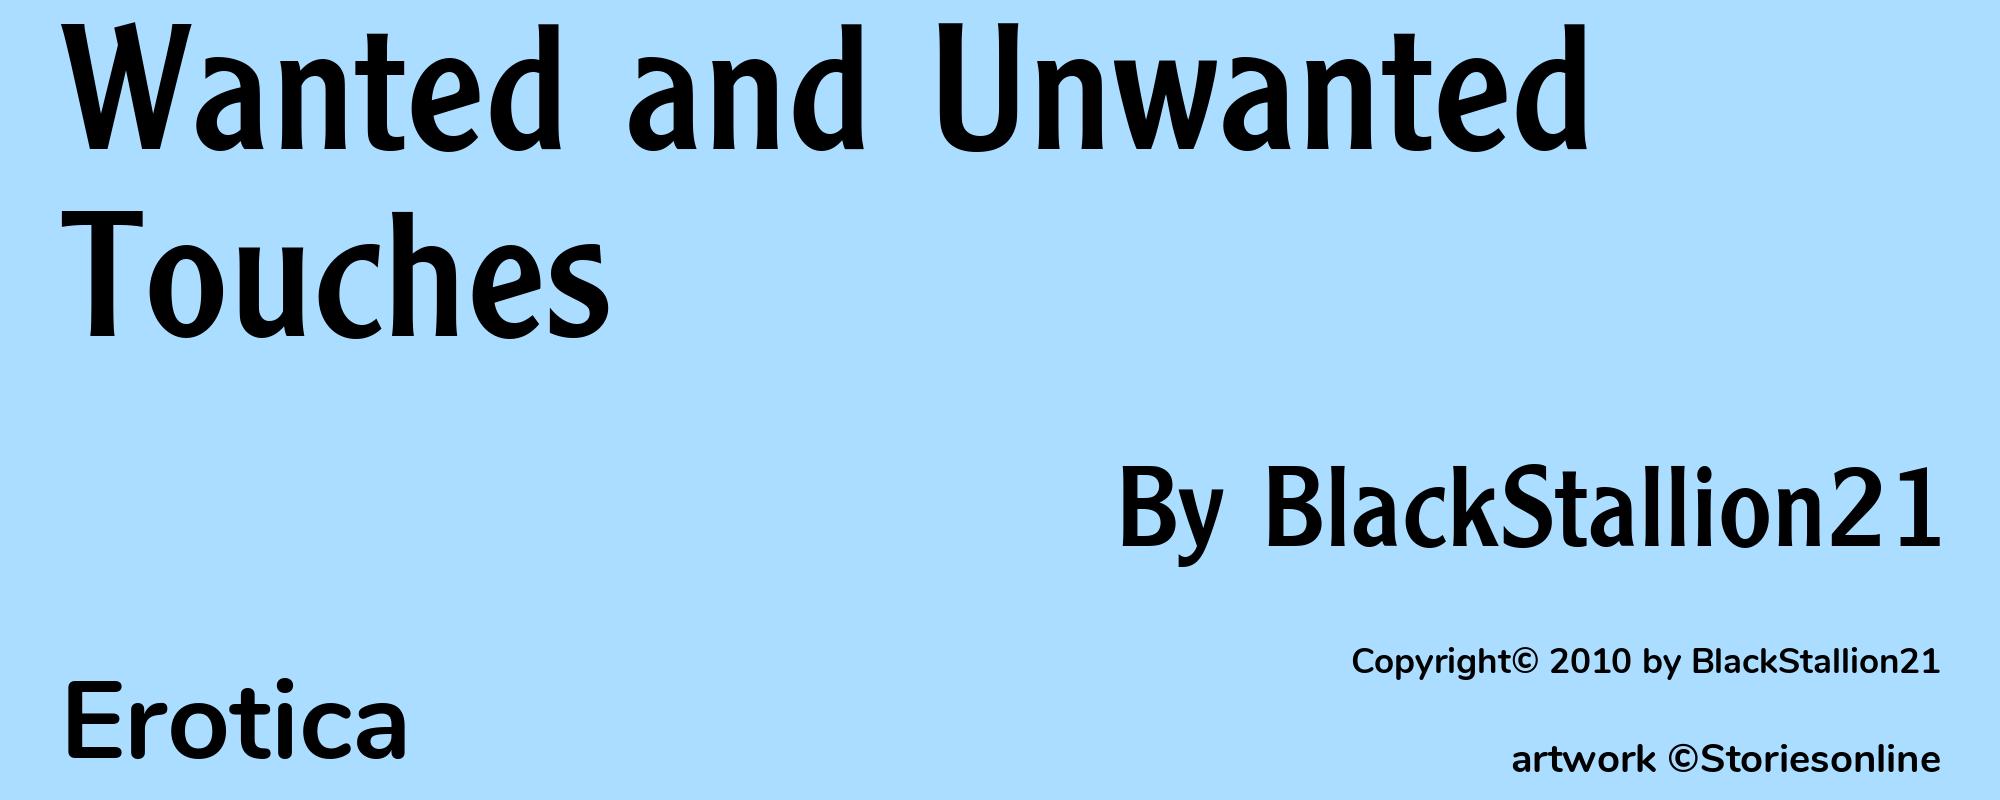 Wanted and Unwanted Touches - Cover